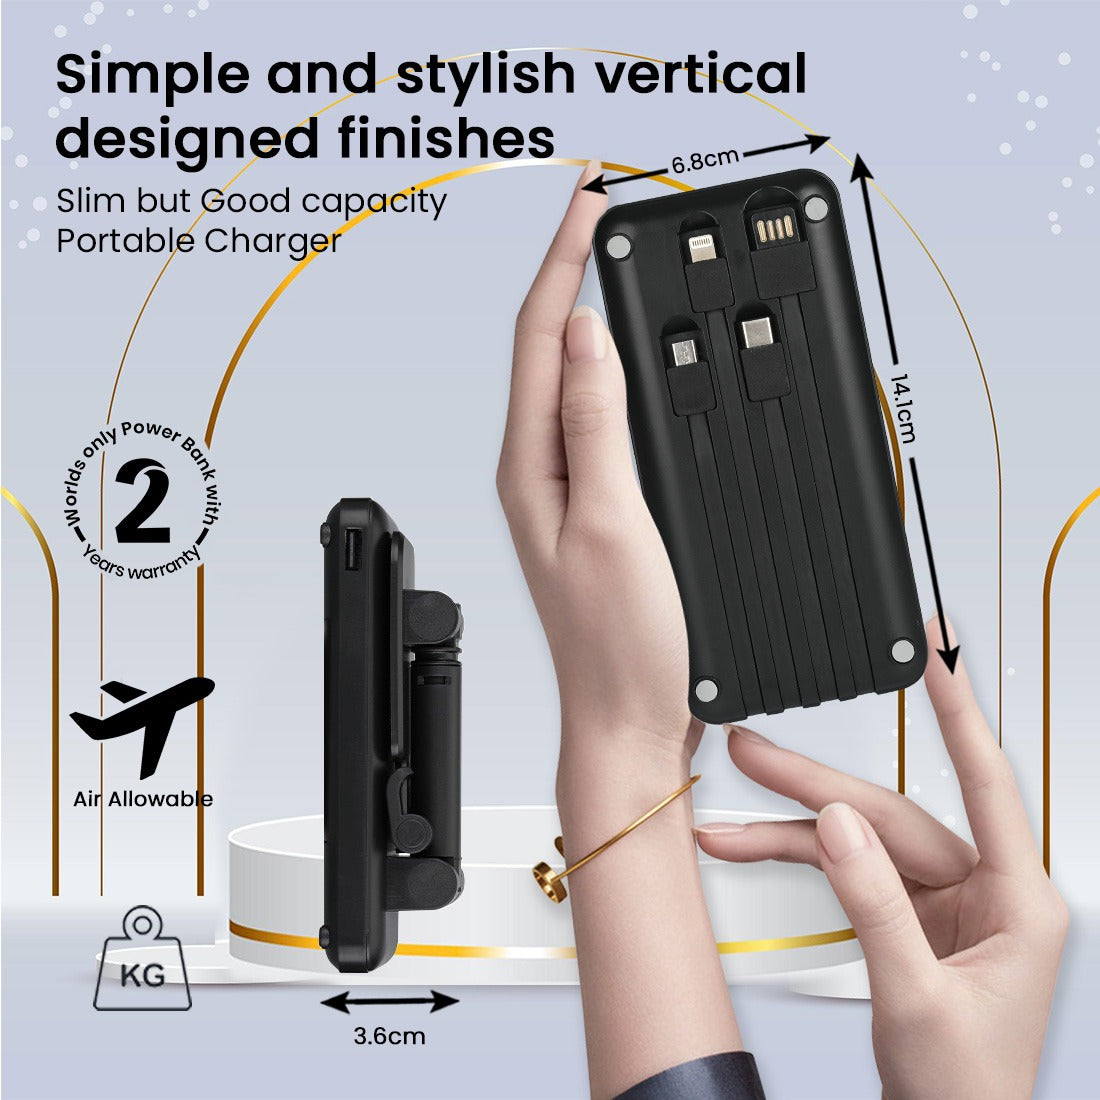 Personalized Black 10000mAh Power Bank cum Mobile Stand - For Corporate Gifting, Event Gifting, Freebies, Promotions - EnCase Pro P0206